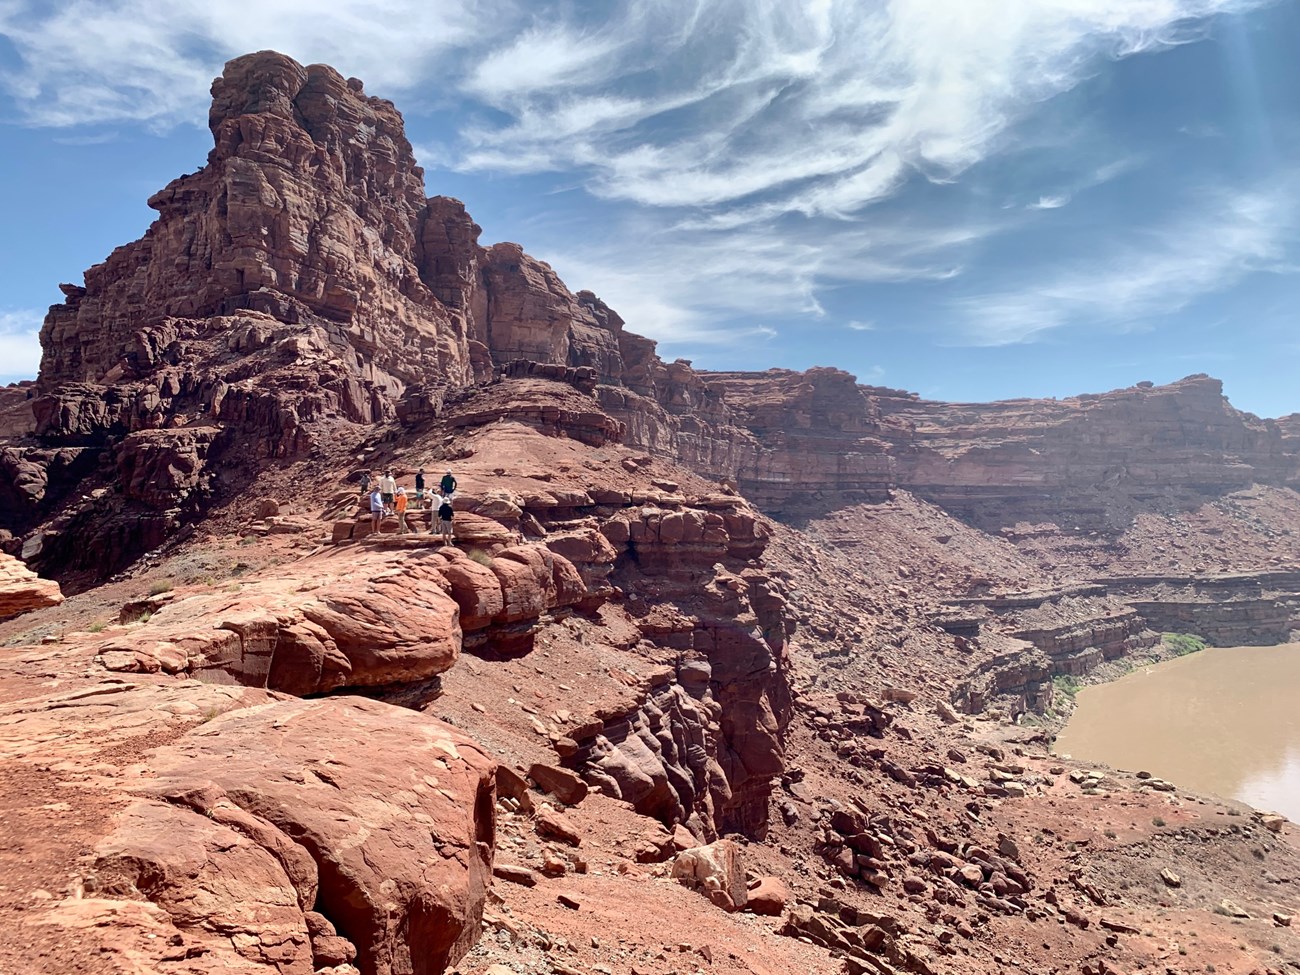 Hikers on a saddle between canyons